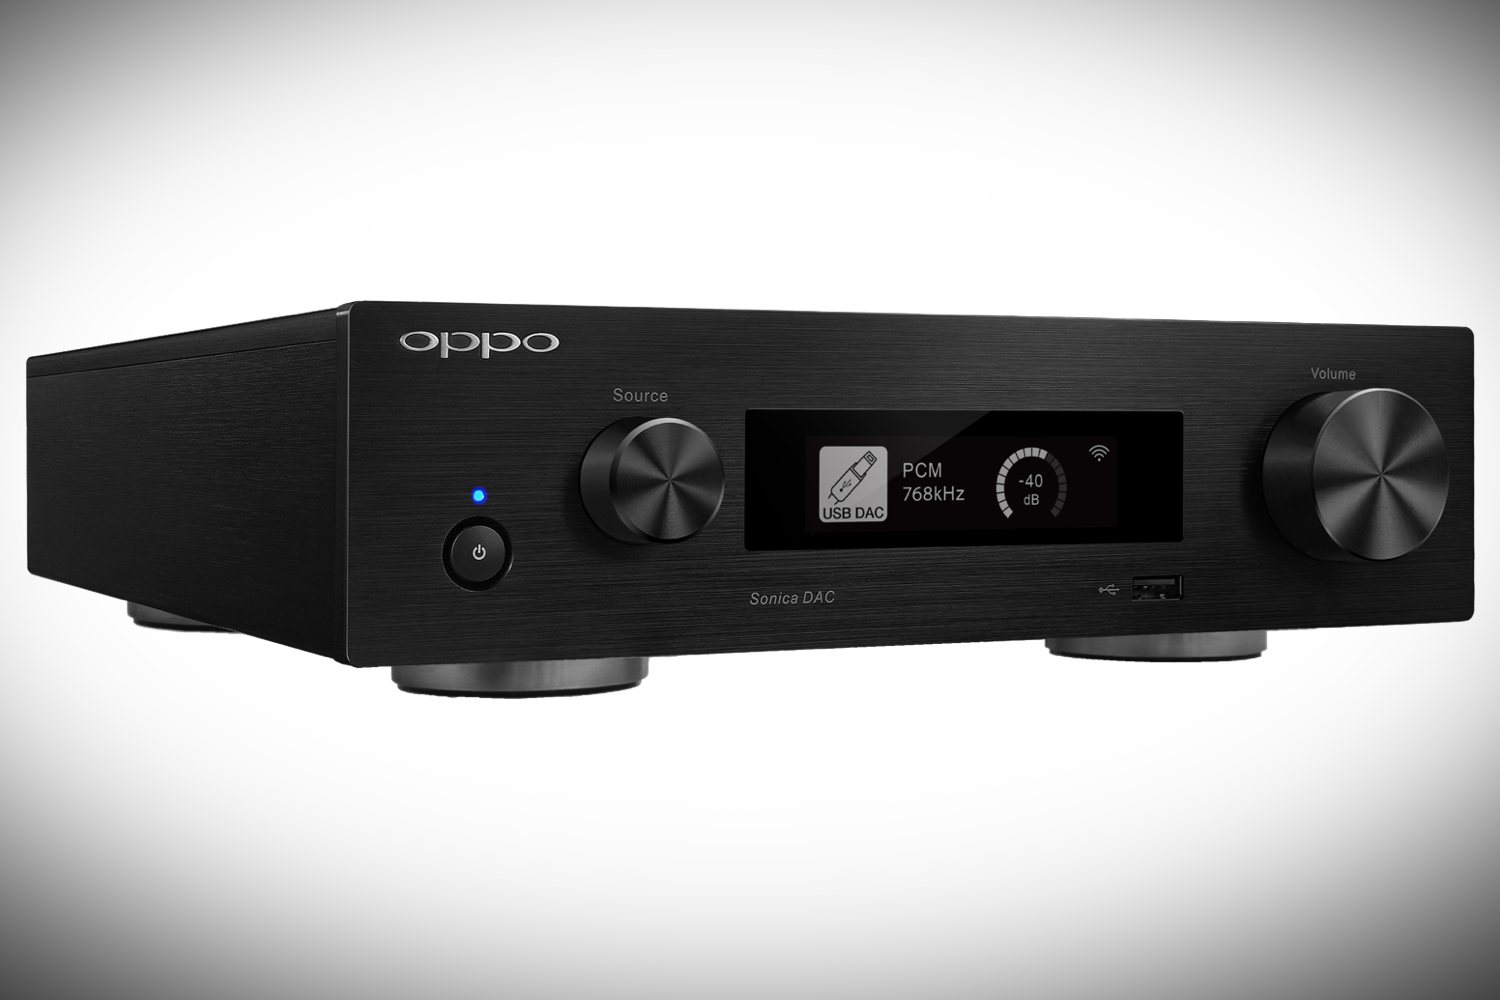 Oppo's new Sonica DAC provides audiophile-quality sound for the